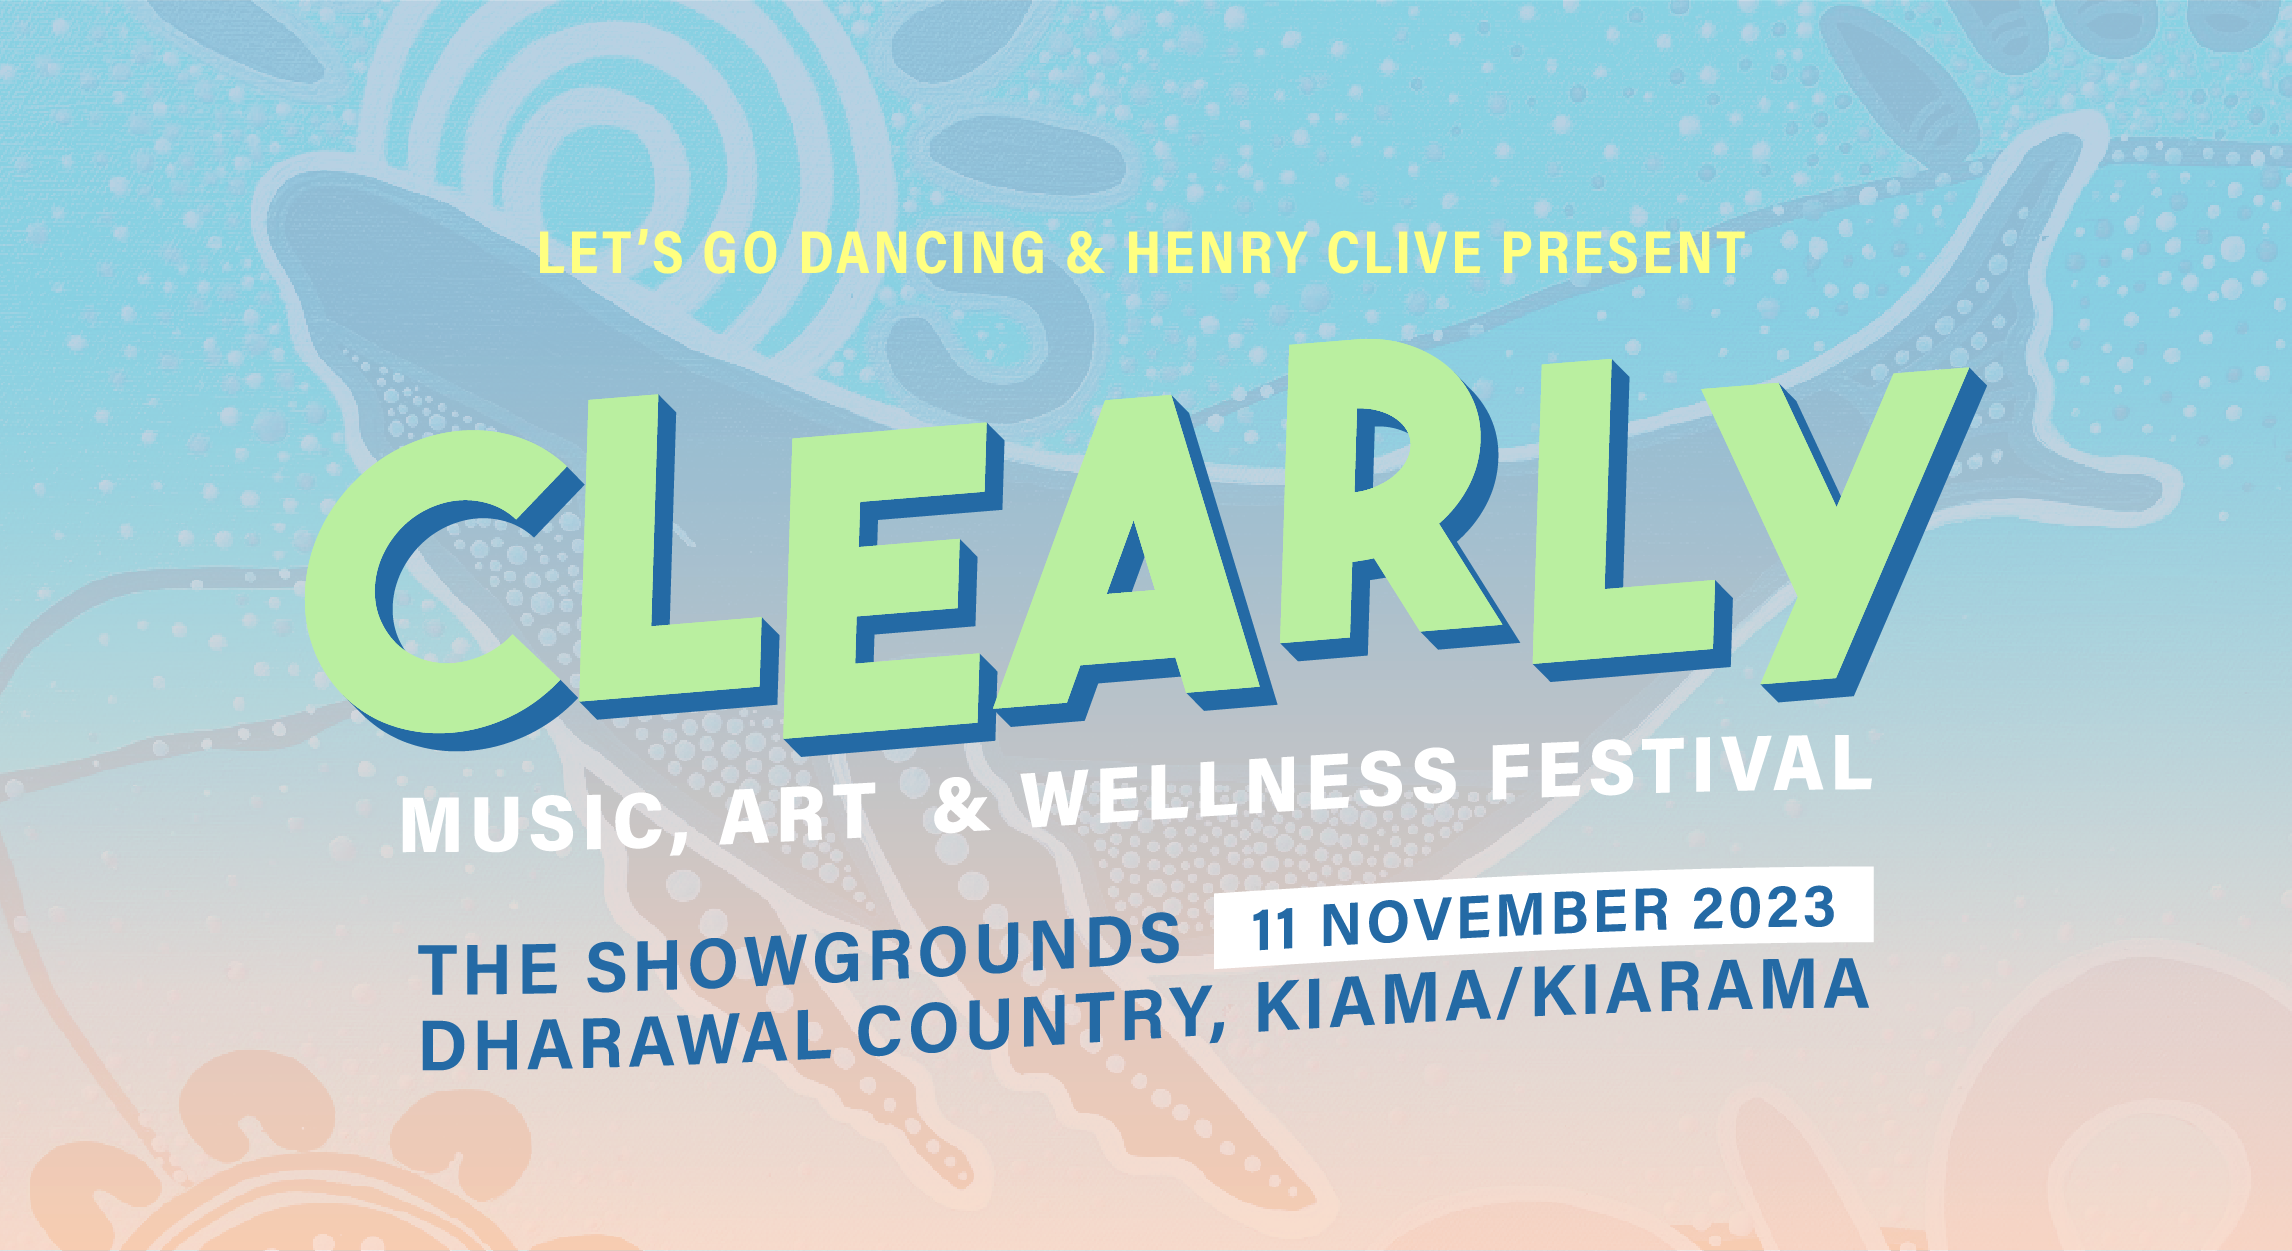 Introducing Clearly Music, Arts & Wellness Festival